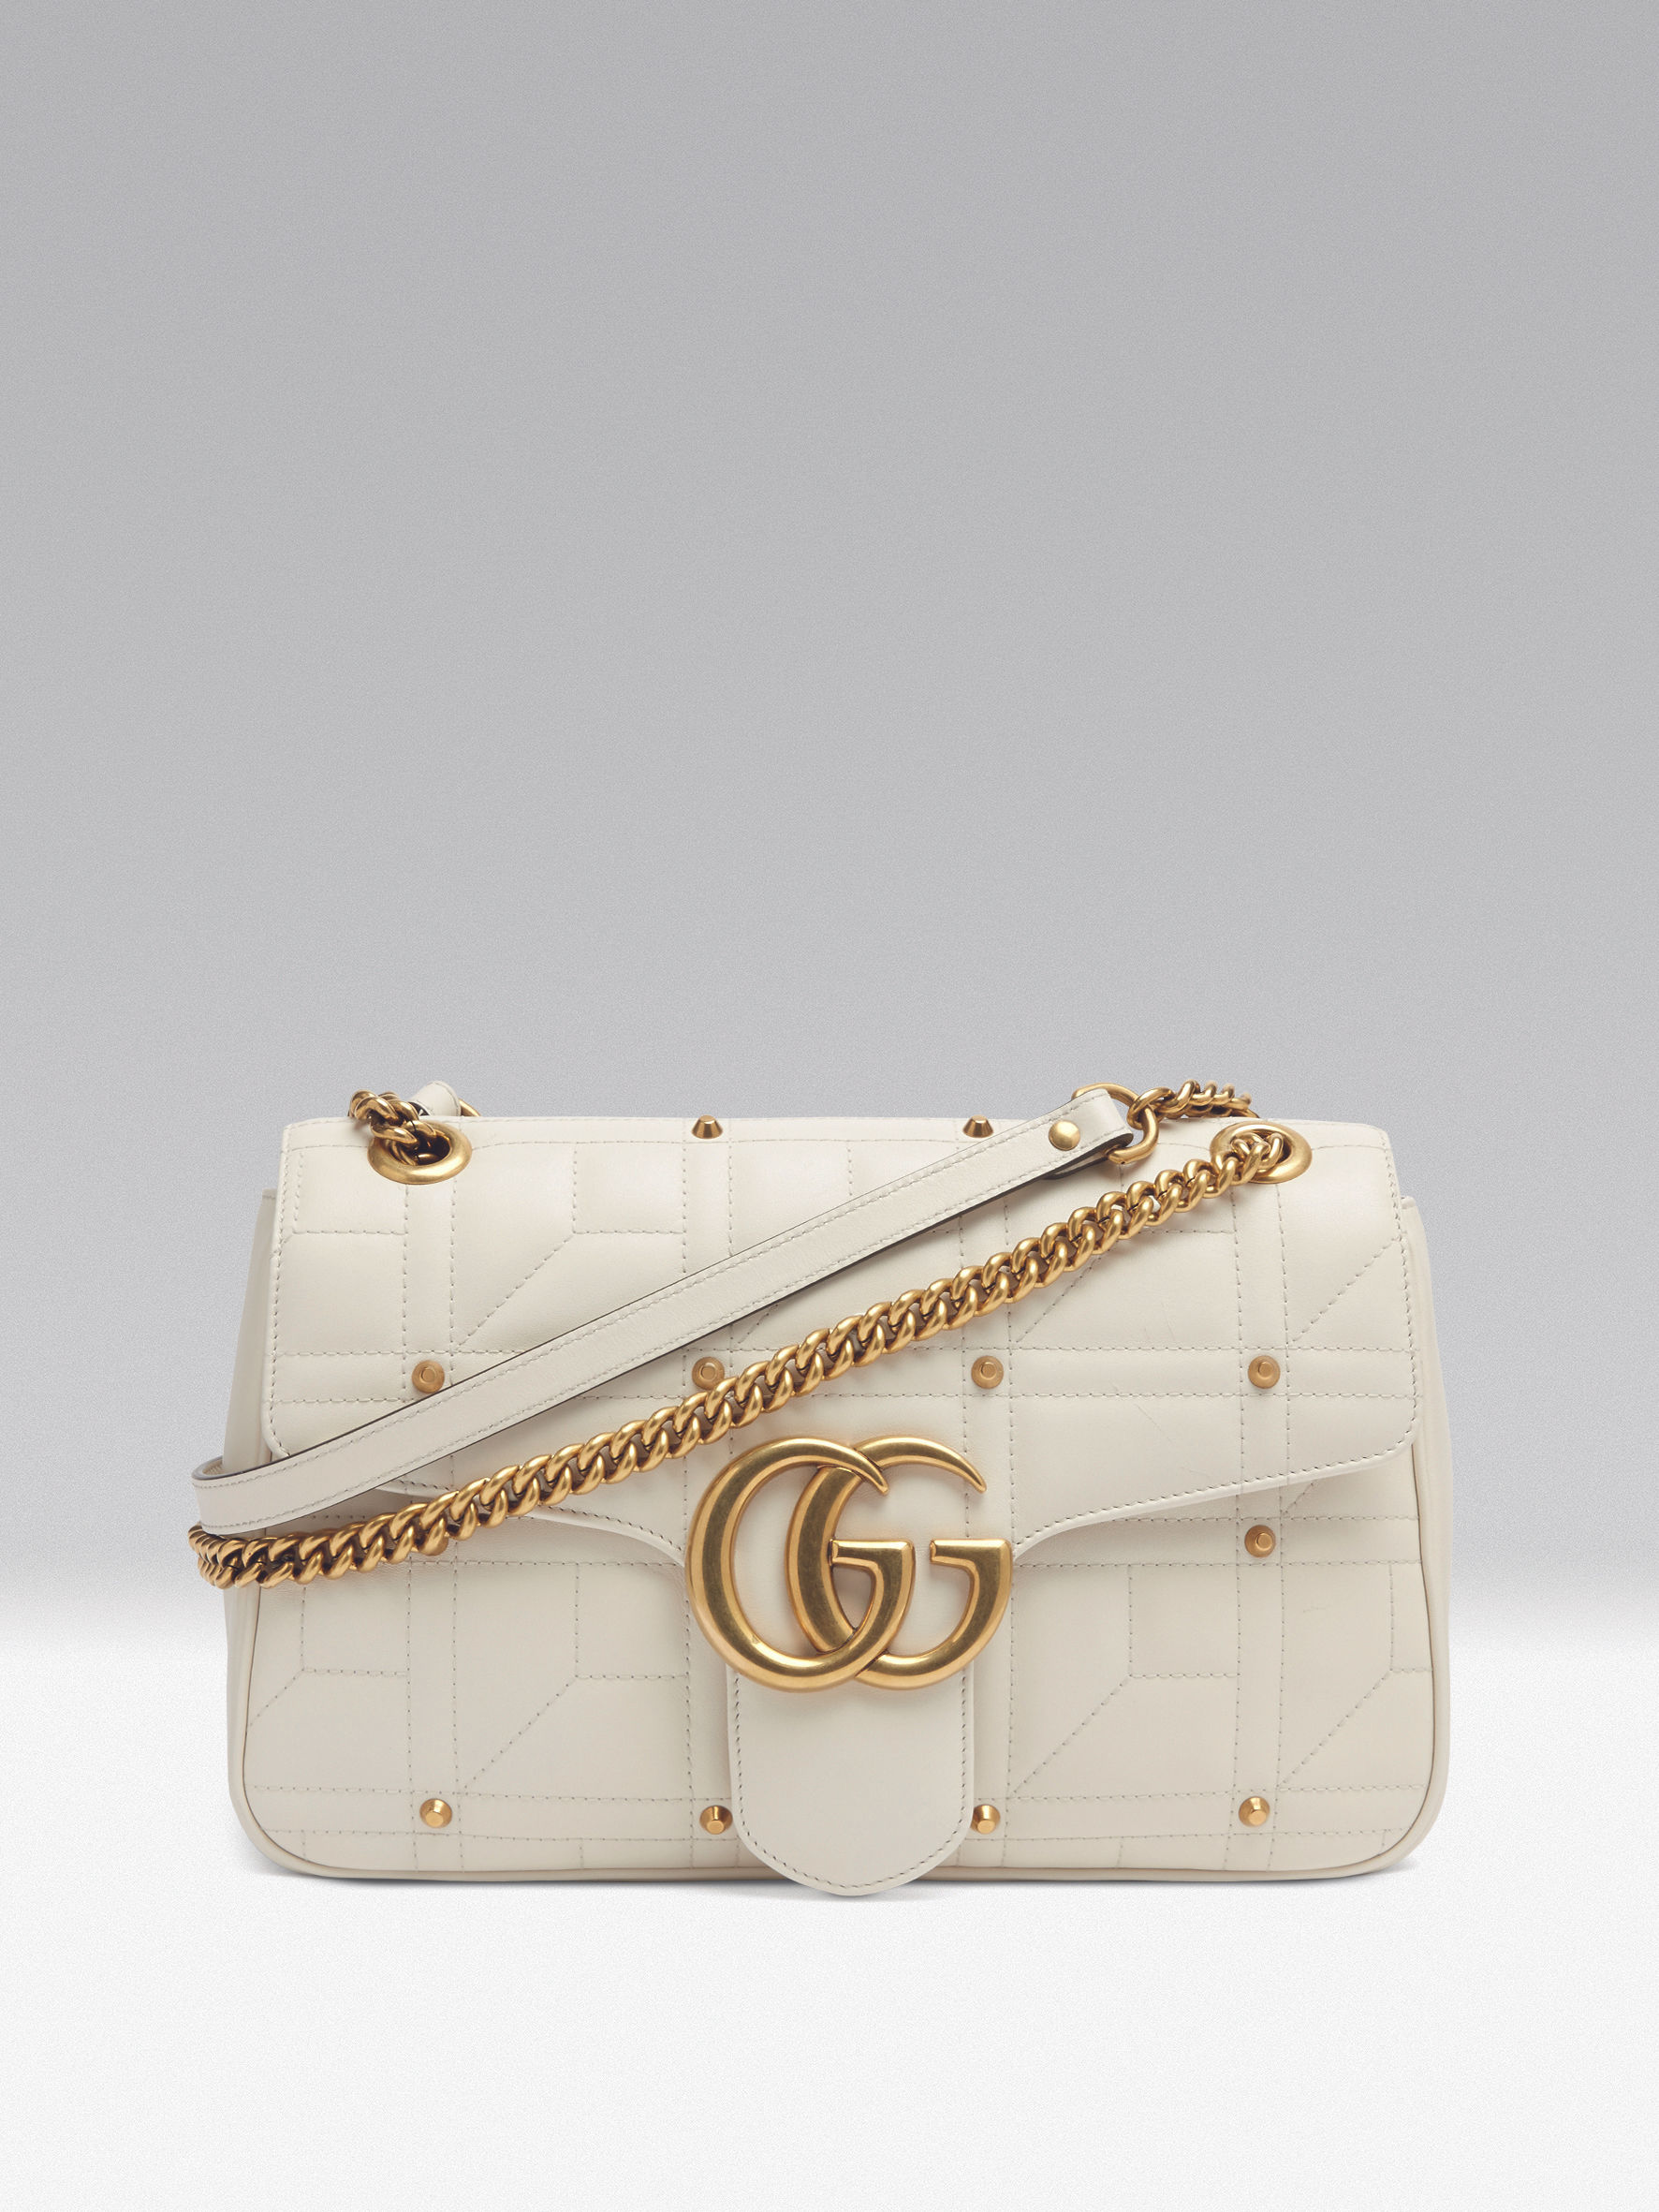 GUCCI introduces the new GG Marmont handbag